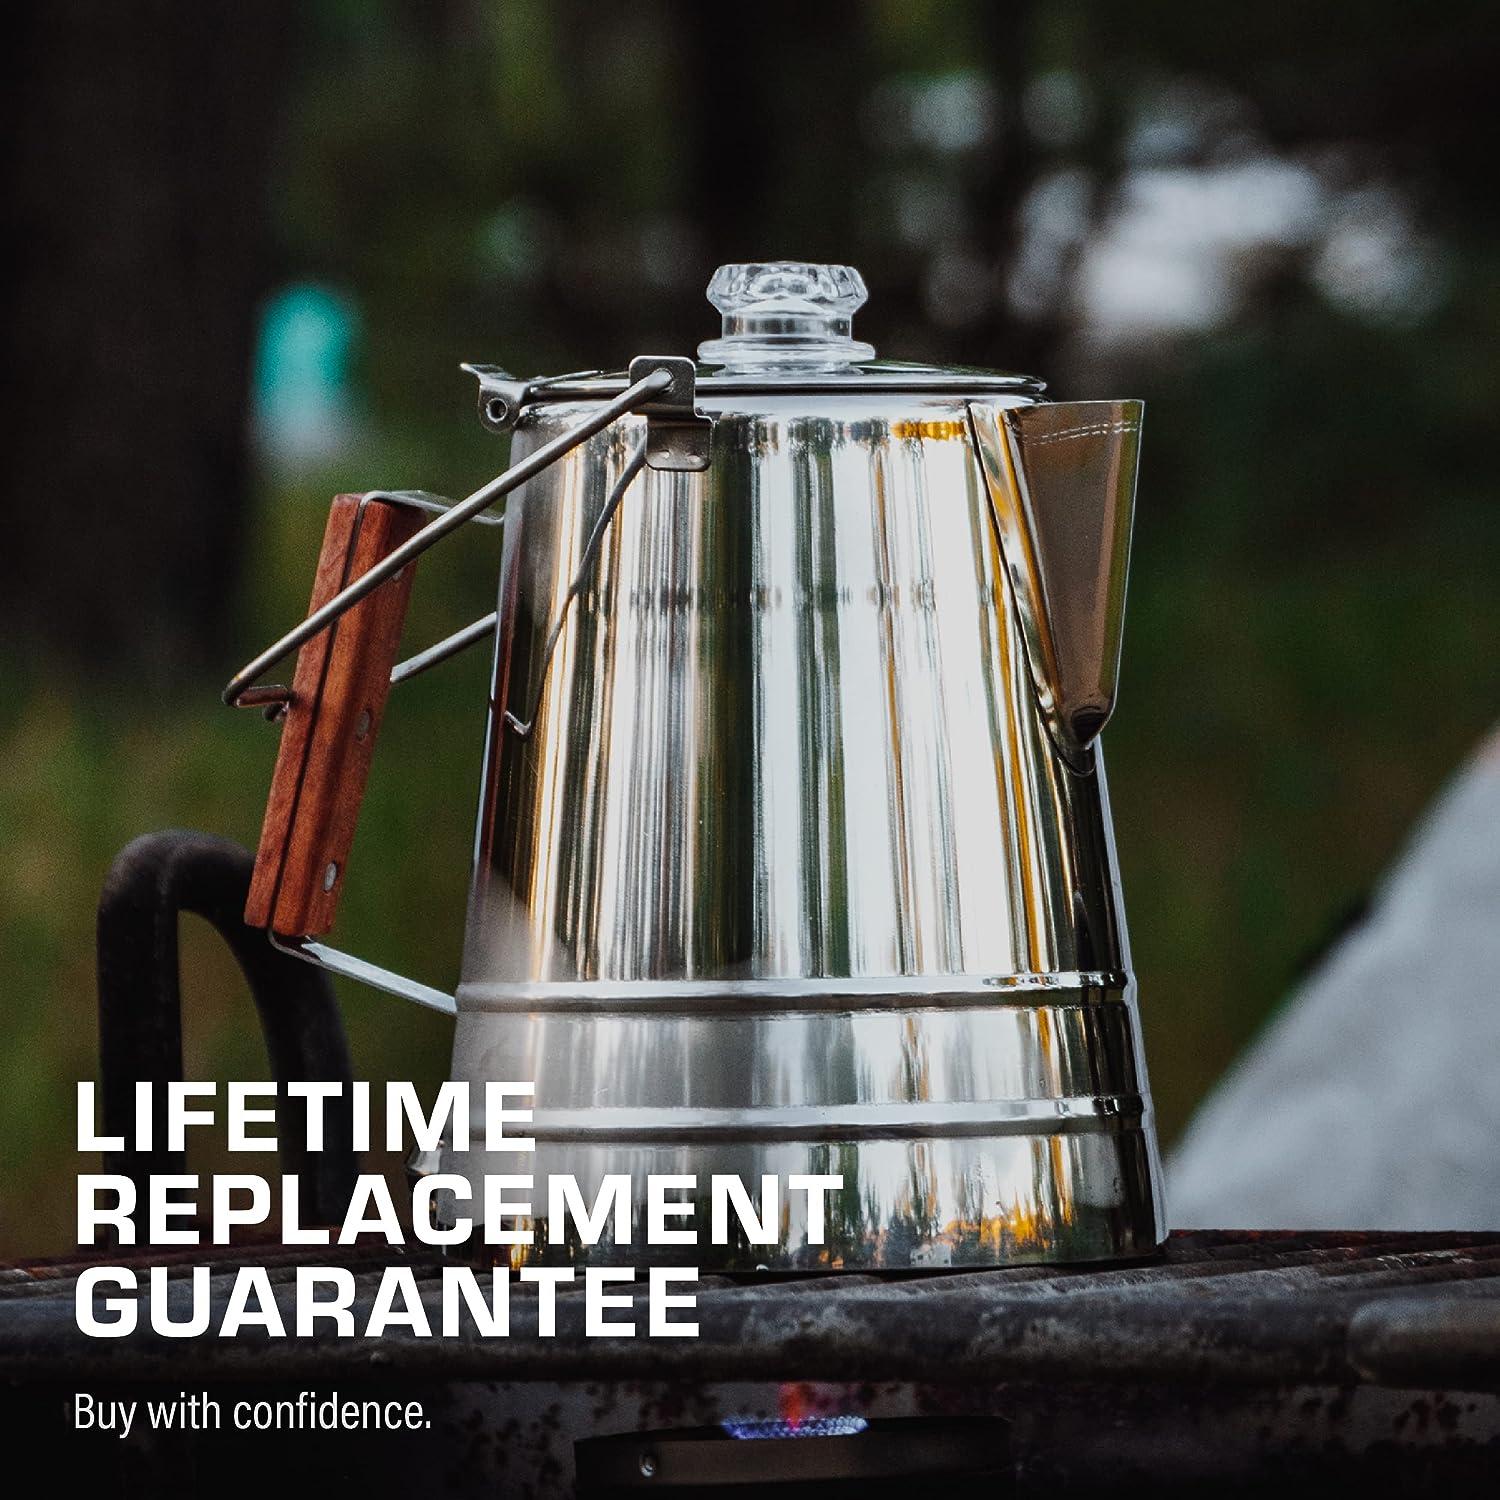 GSI Outdoors Glacier Stainless 6 Cup Percolator